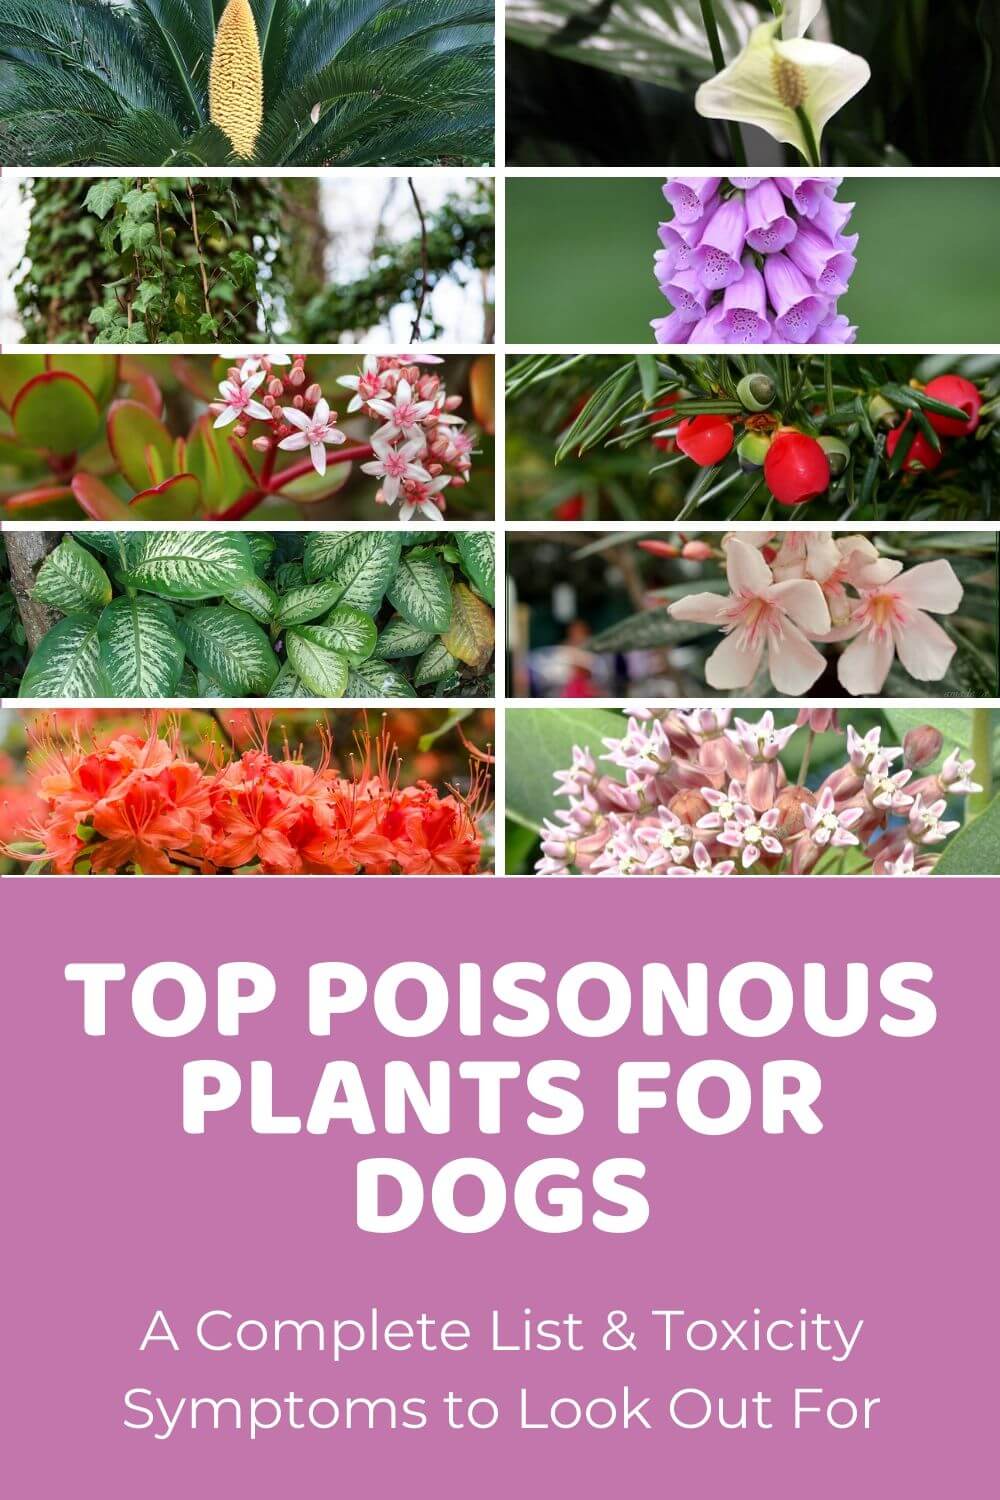 List of Safe and Poisonous Plants for Dogs